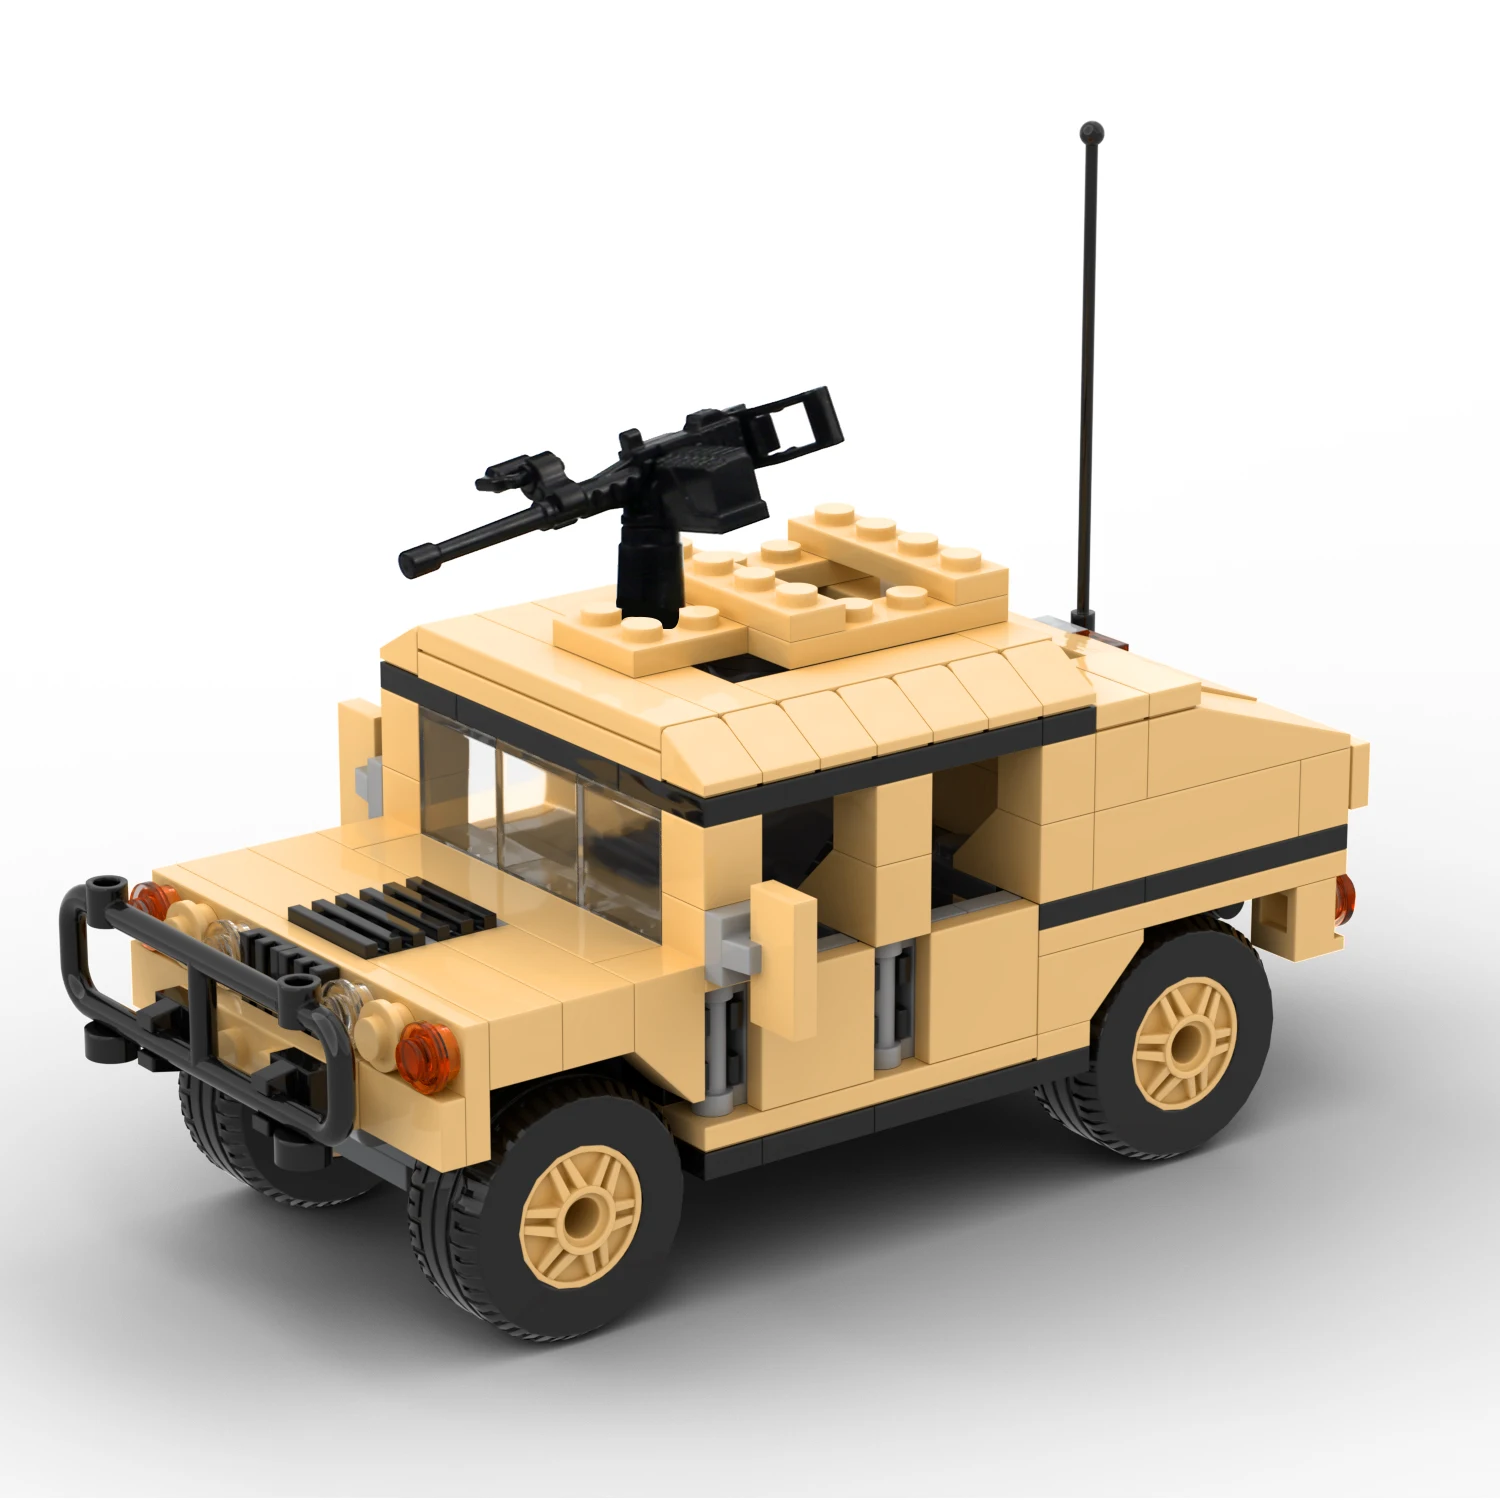 Military SWAT Transport Vehicle Hummer Armament Carrier M1025 Cargo Troop Car Army Figures Weapon Gun Building Blocks Toy Gift